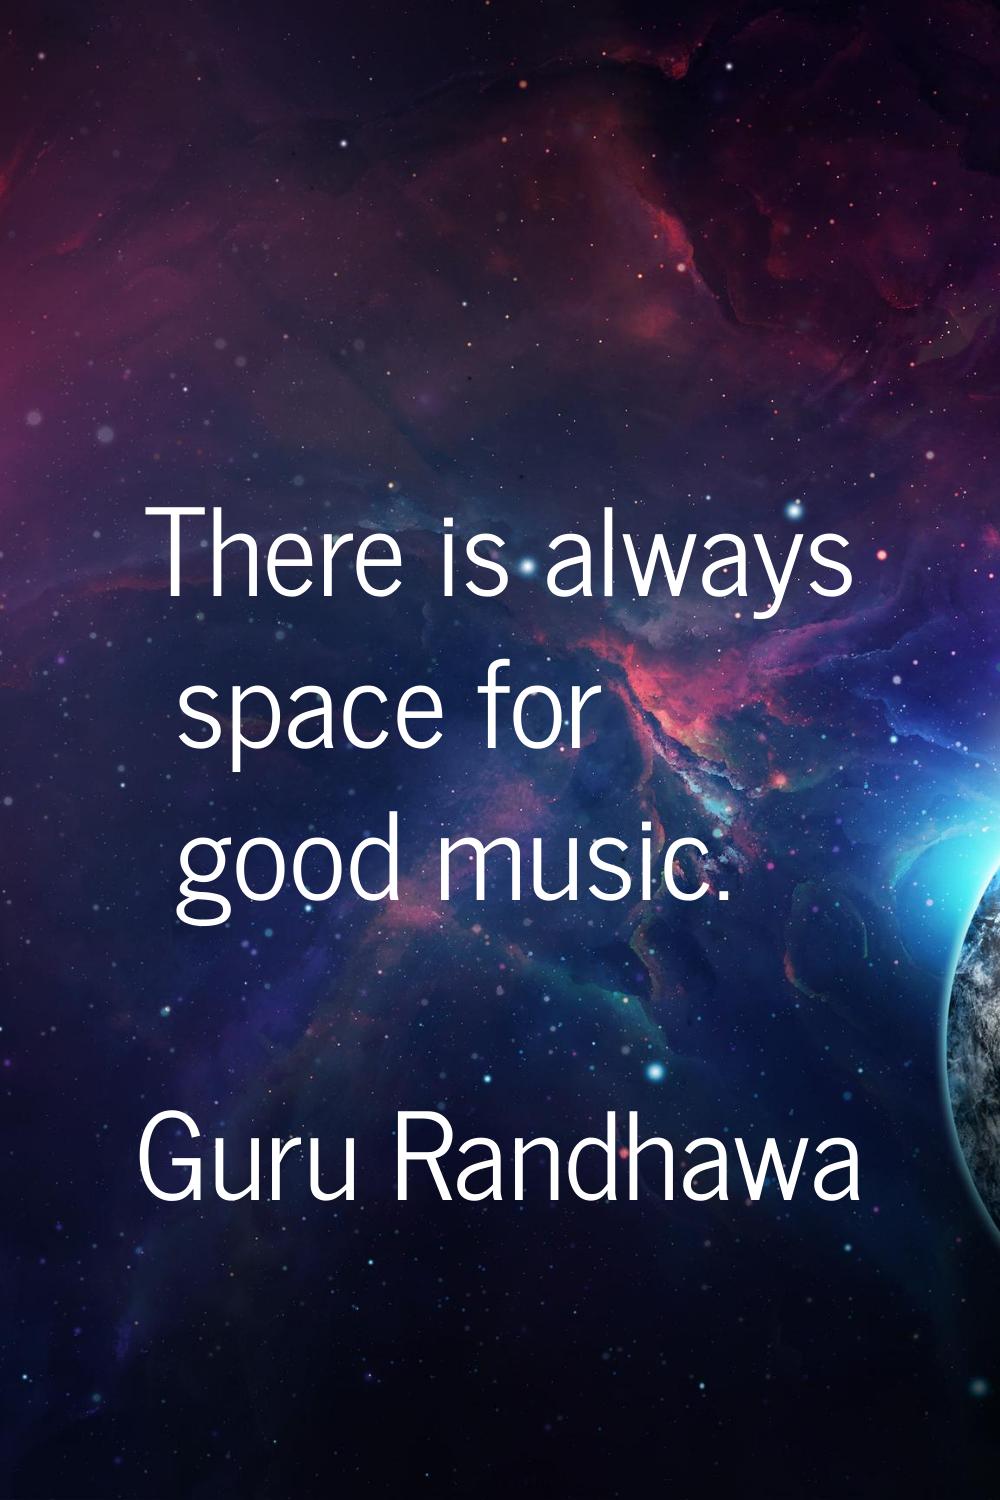 There is always space for good music.